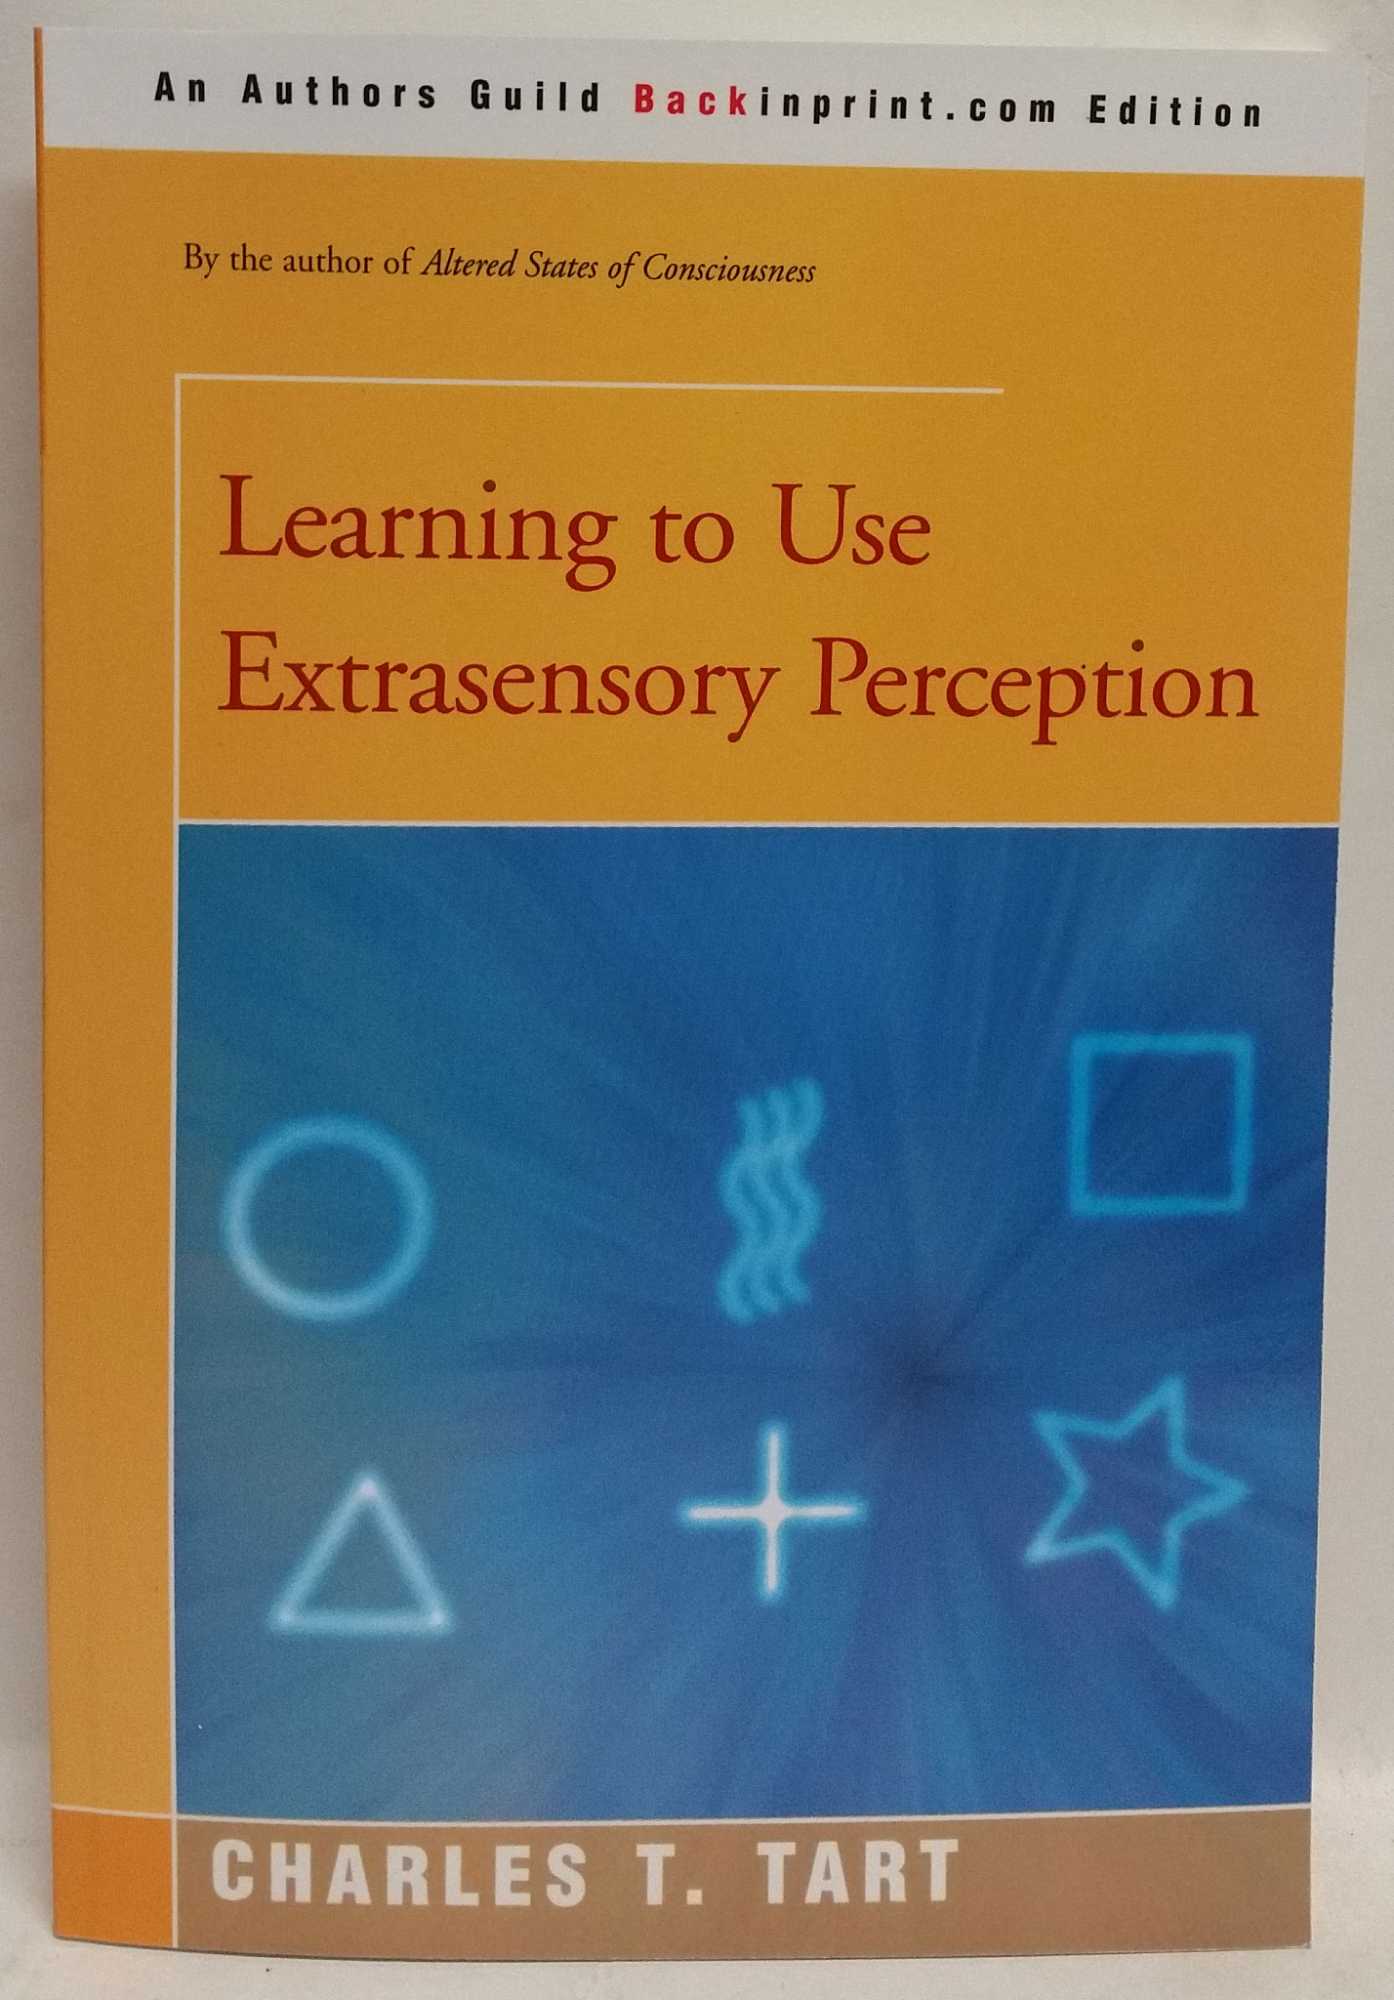 Charles T. Tart - Learning to Use Extrasensory Perception